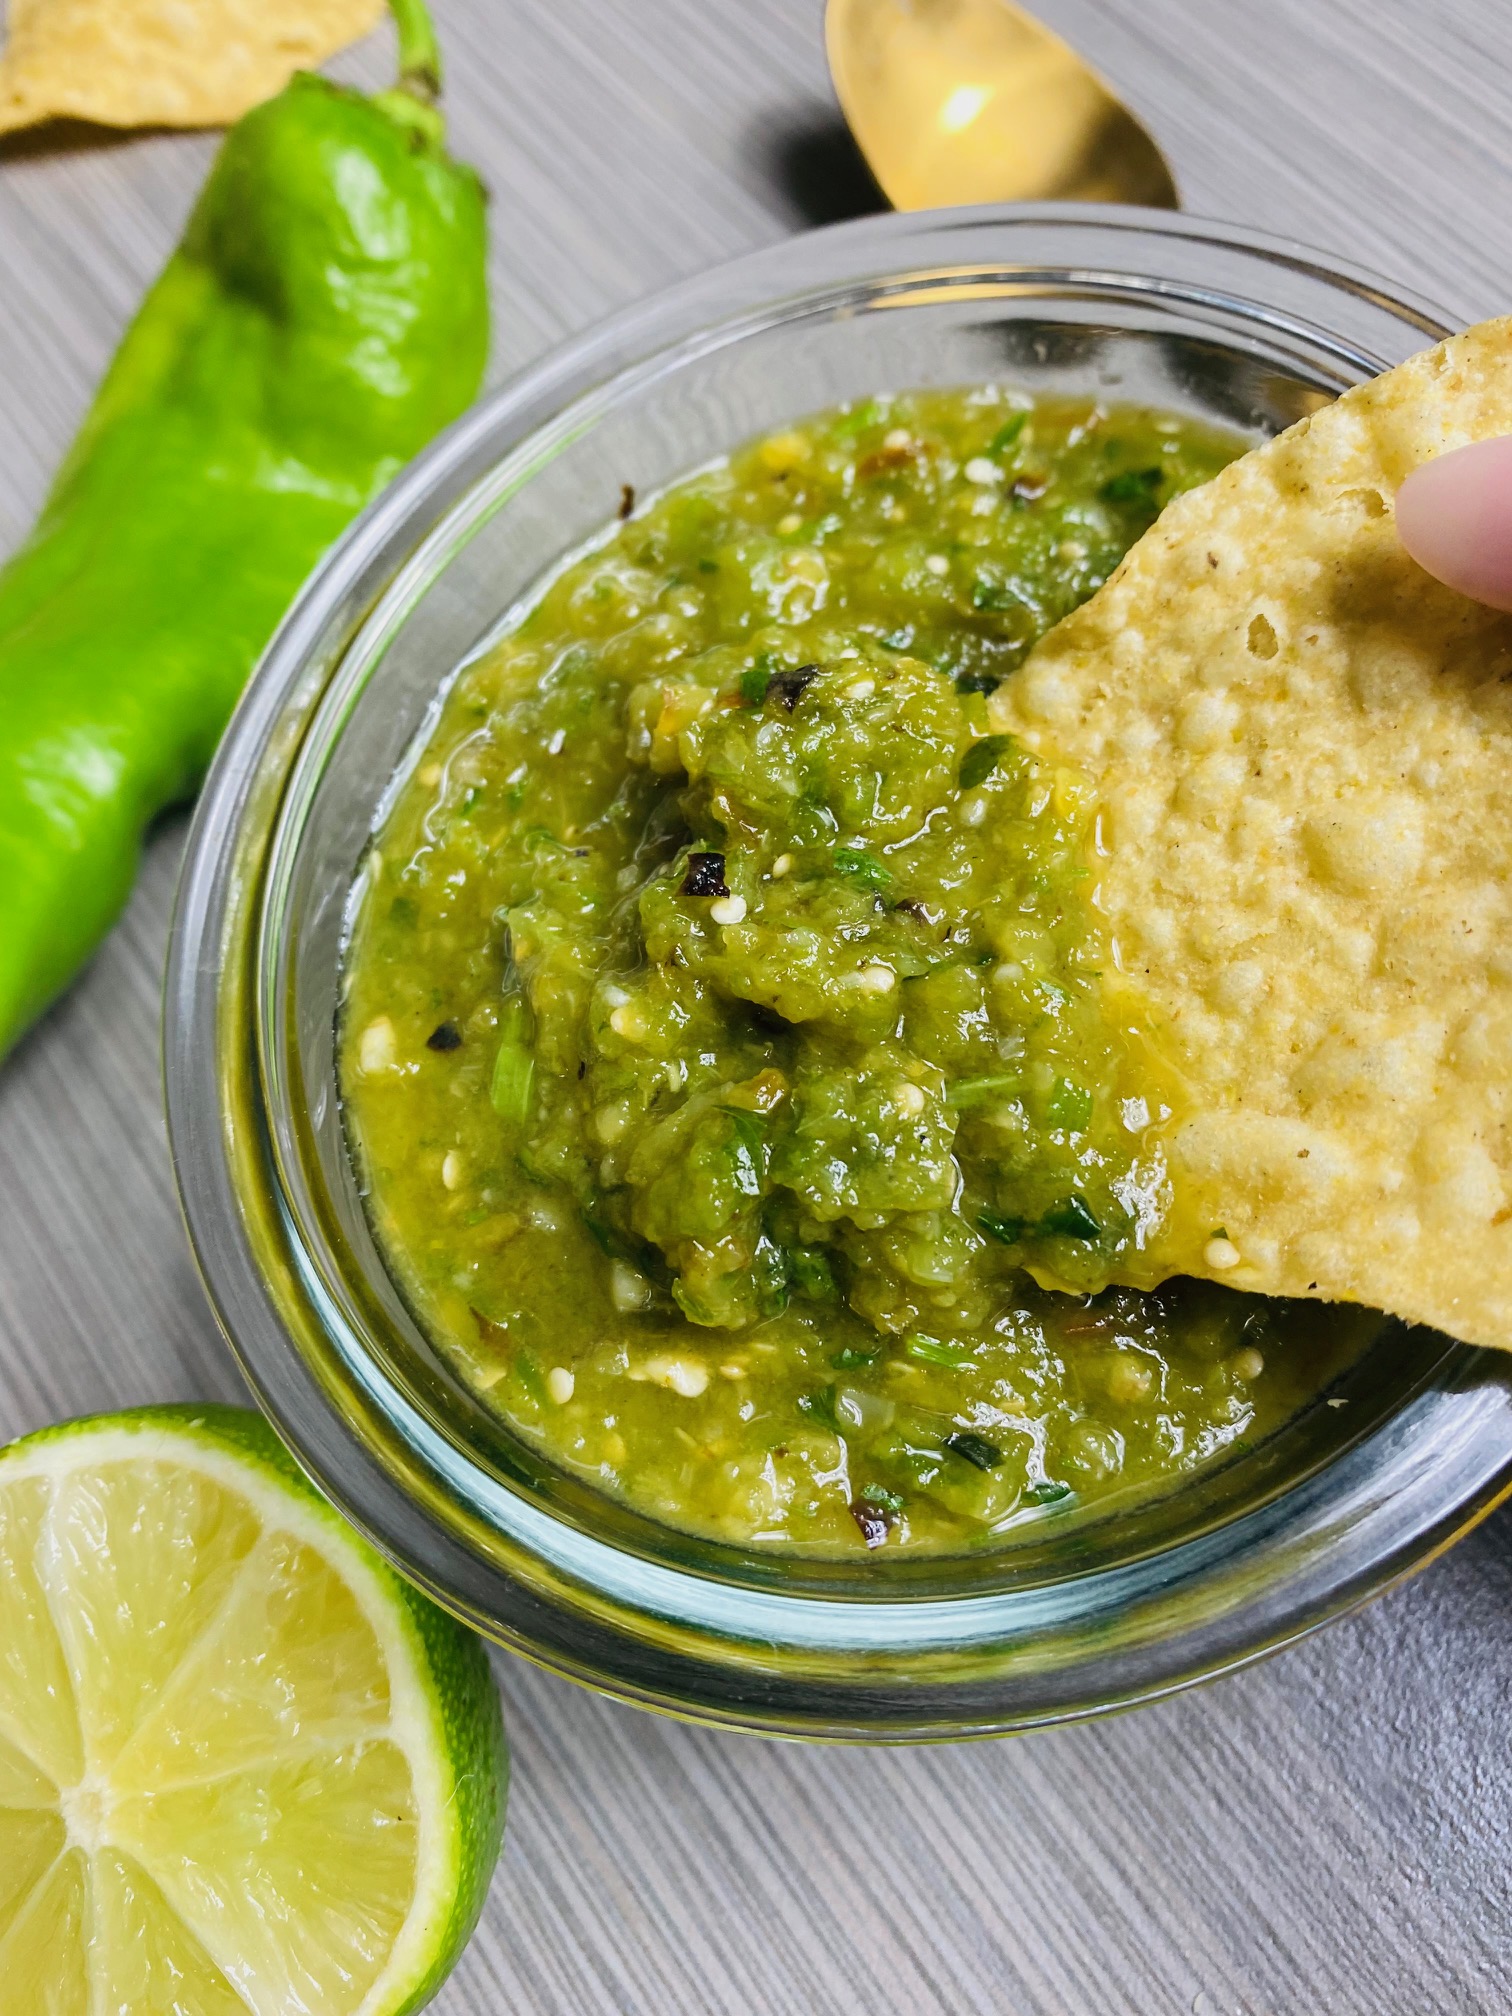 Salsa verde in a clear serving dish with a tortilla chip being dipped into the salsa. The serving dish is surrounded by a half of lime, a Hatch chile, a gold spoon, and more tortilla chips in the background.